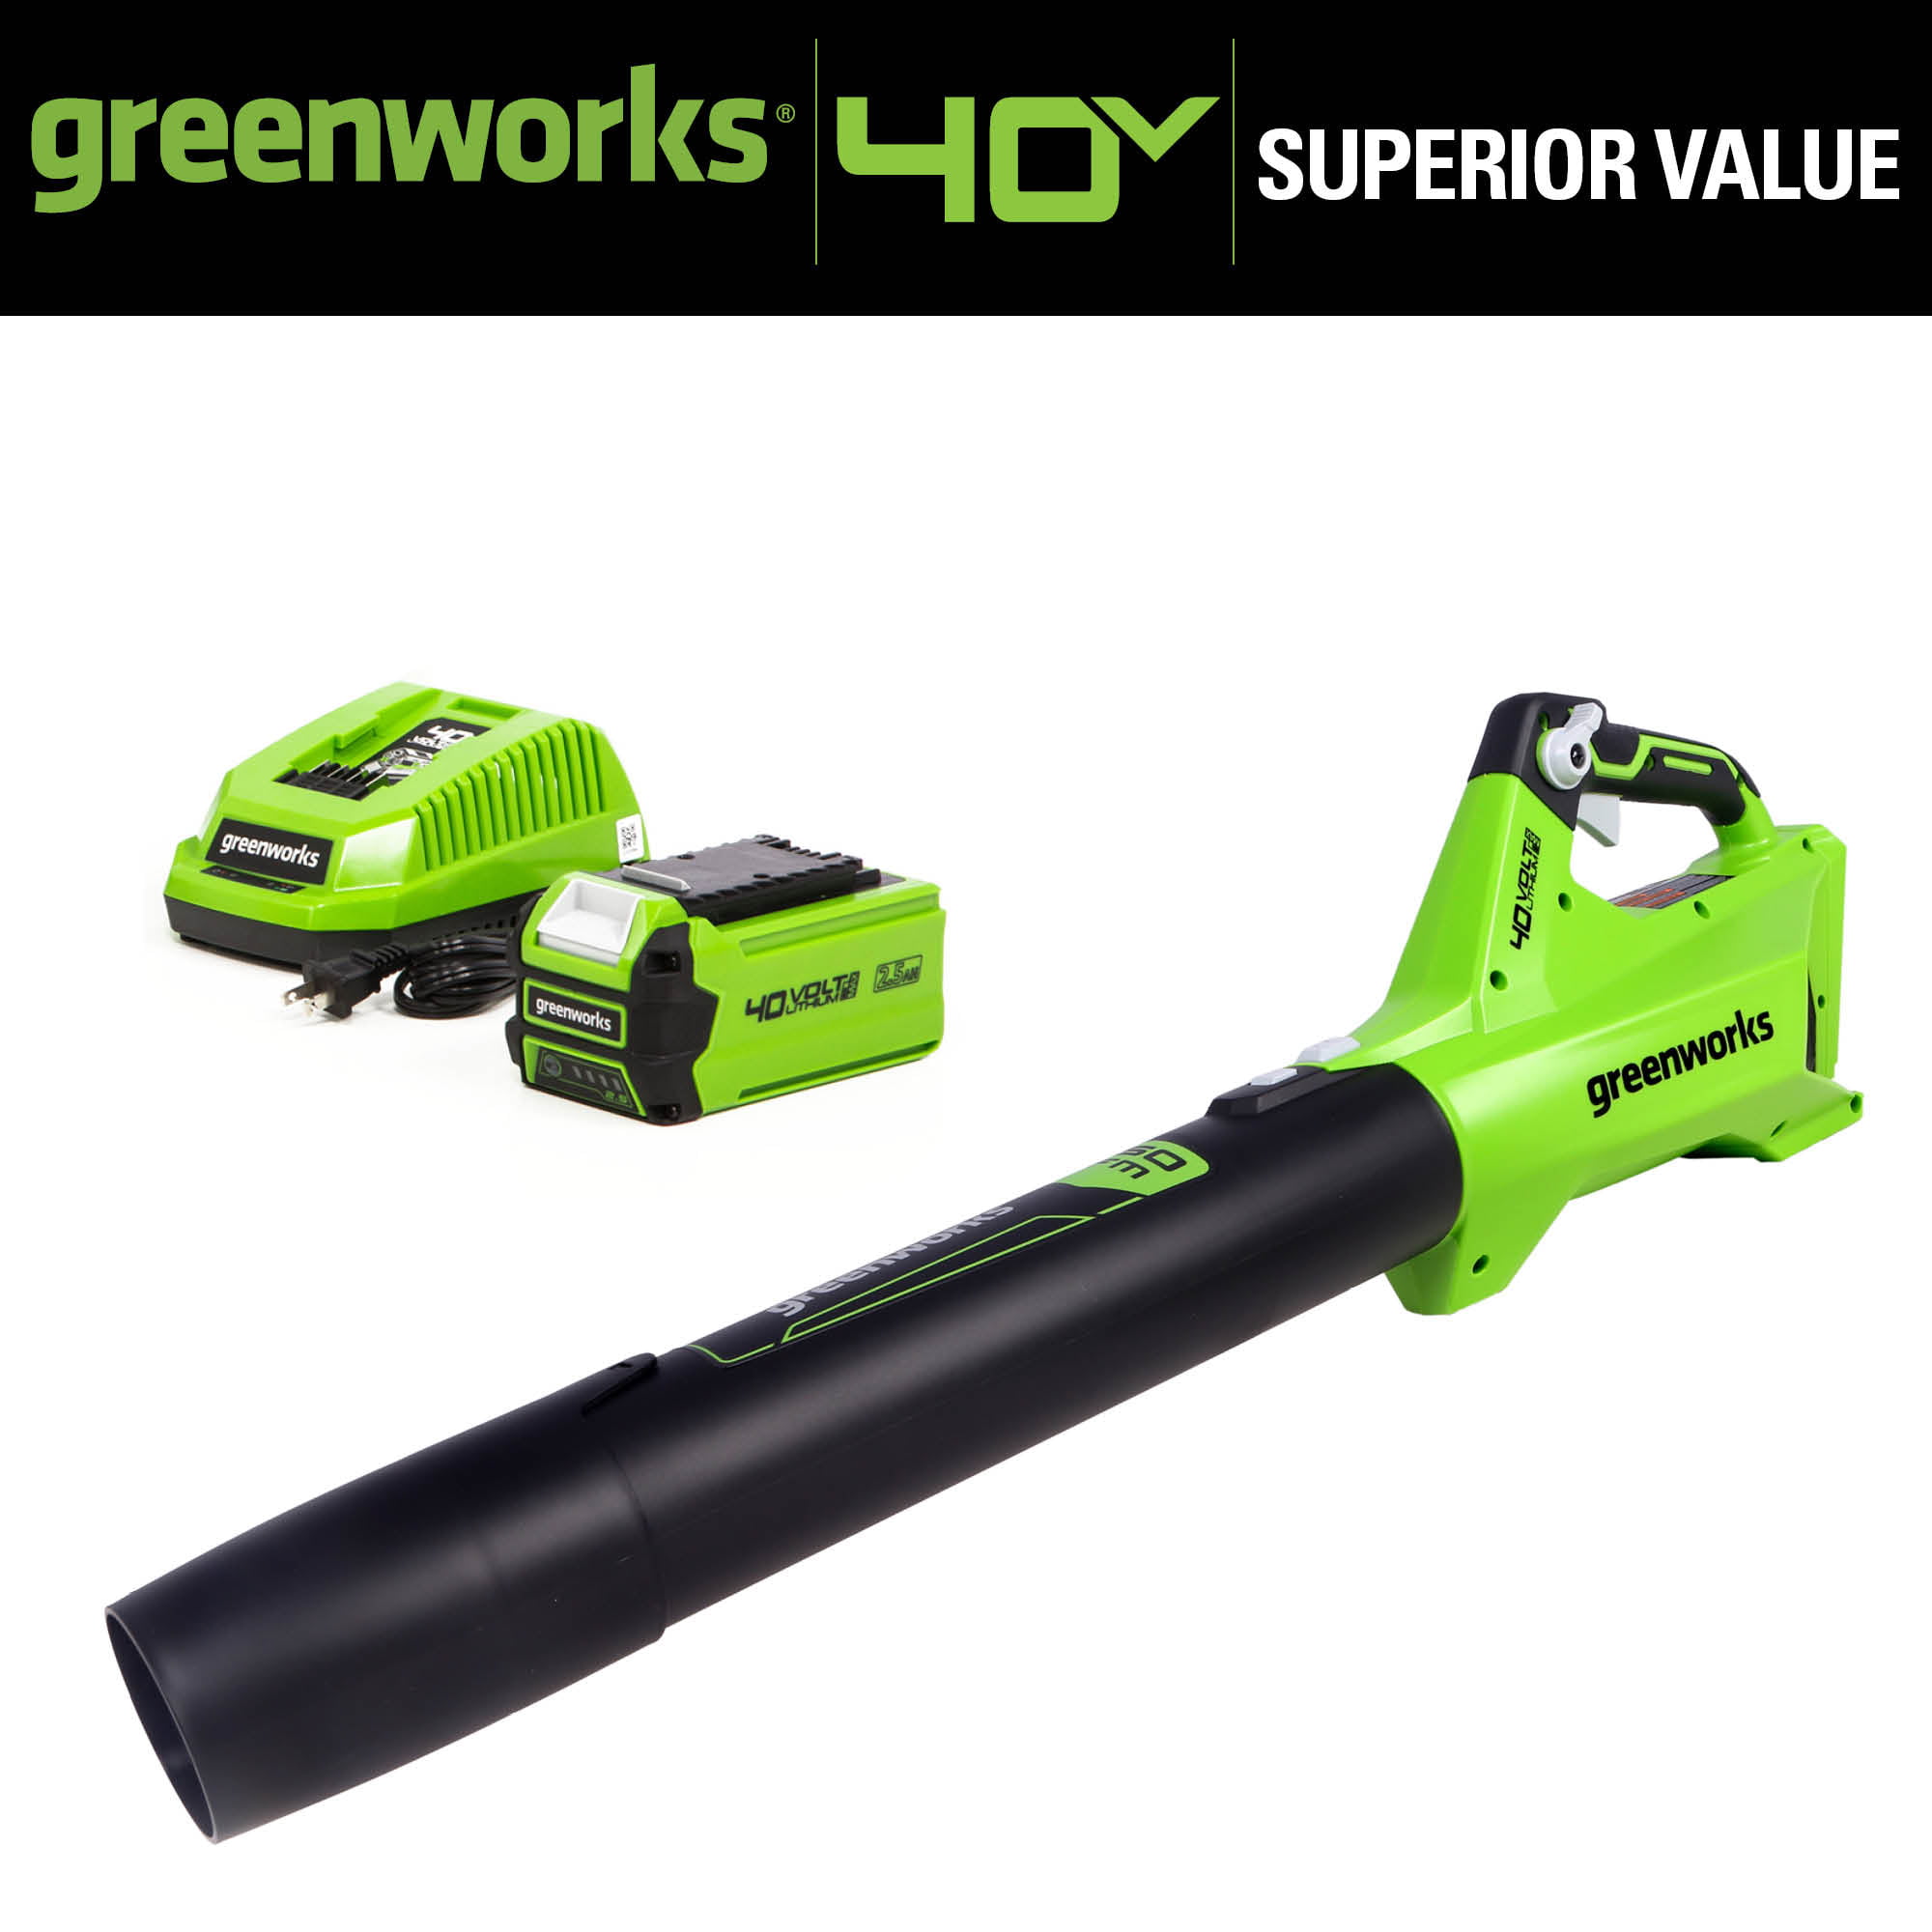 Greenworks 40V (120 mph / 450 cfm) Axial Blower, 2.5Ah Battery and Charger  –